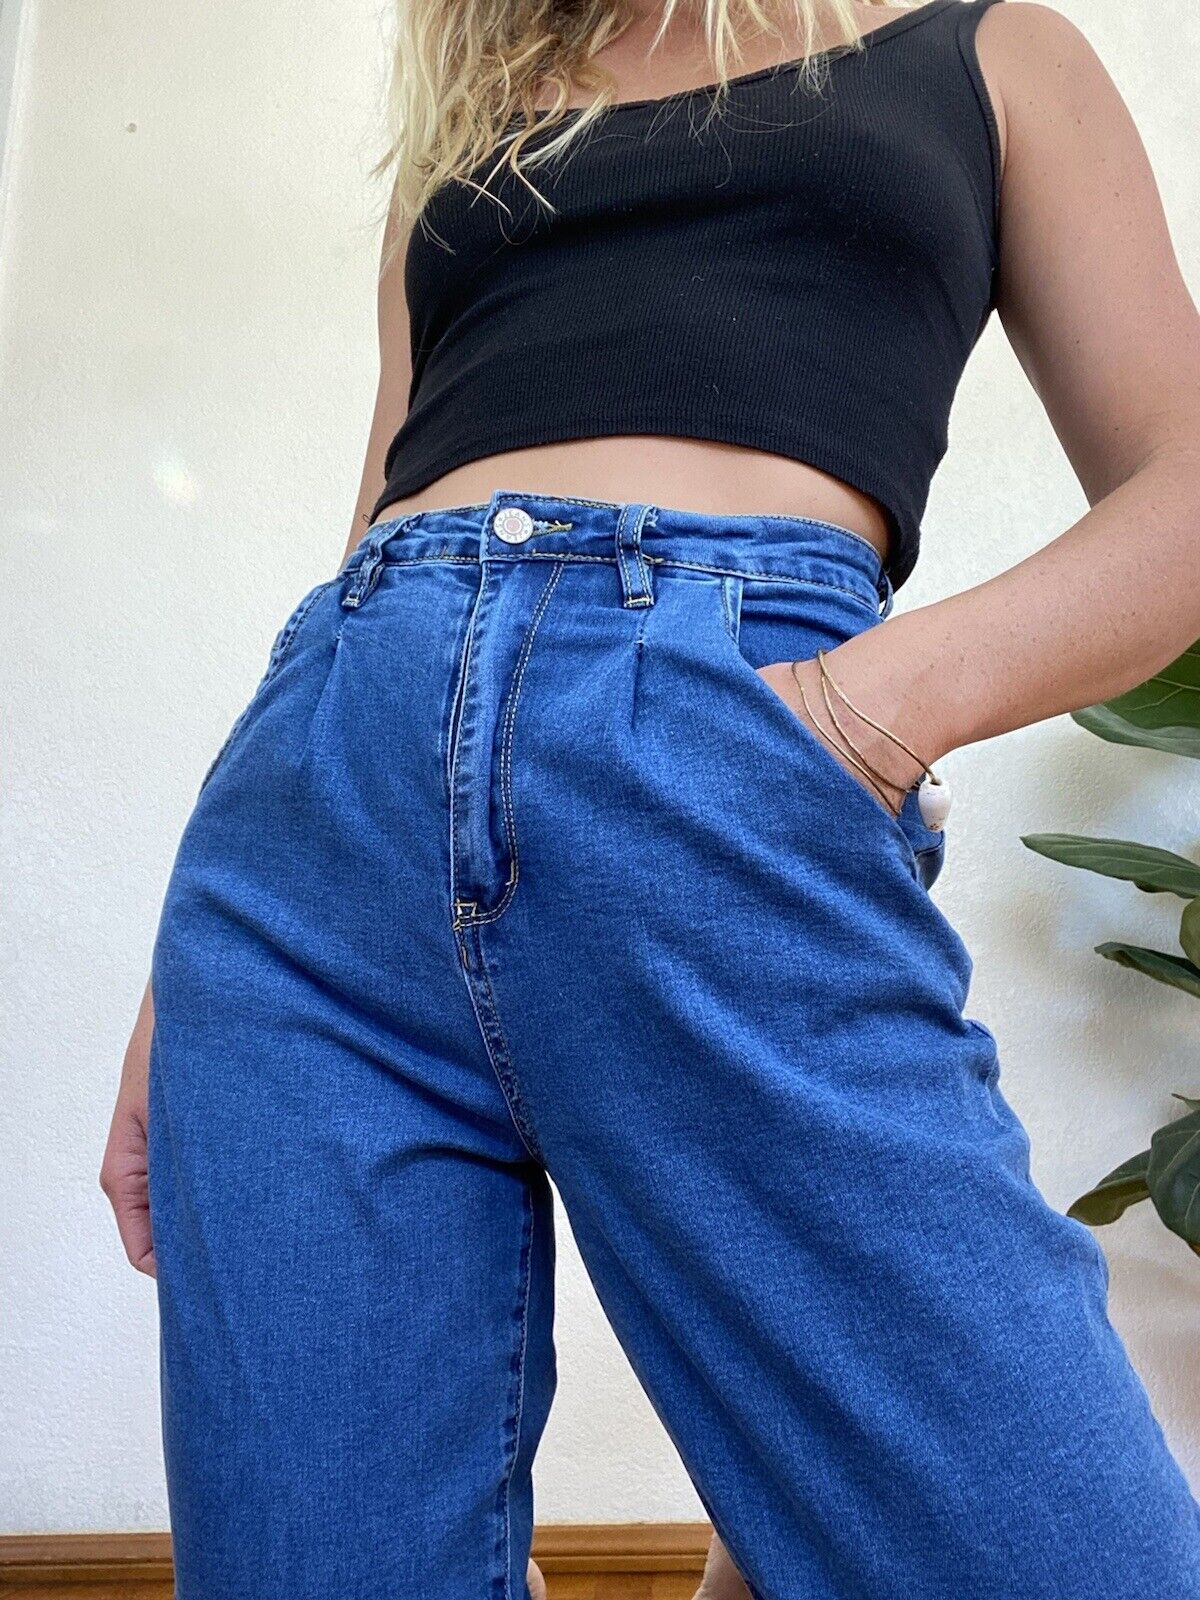 Vintage High Waist Tapered Denim Jeans - Unbranded - Women's Small